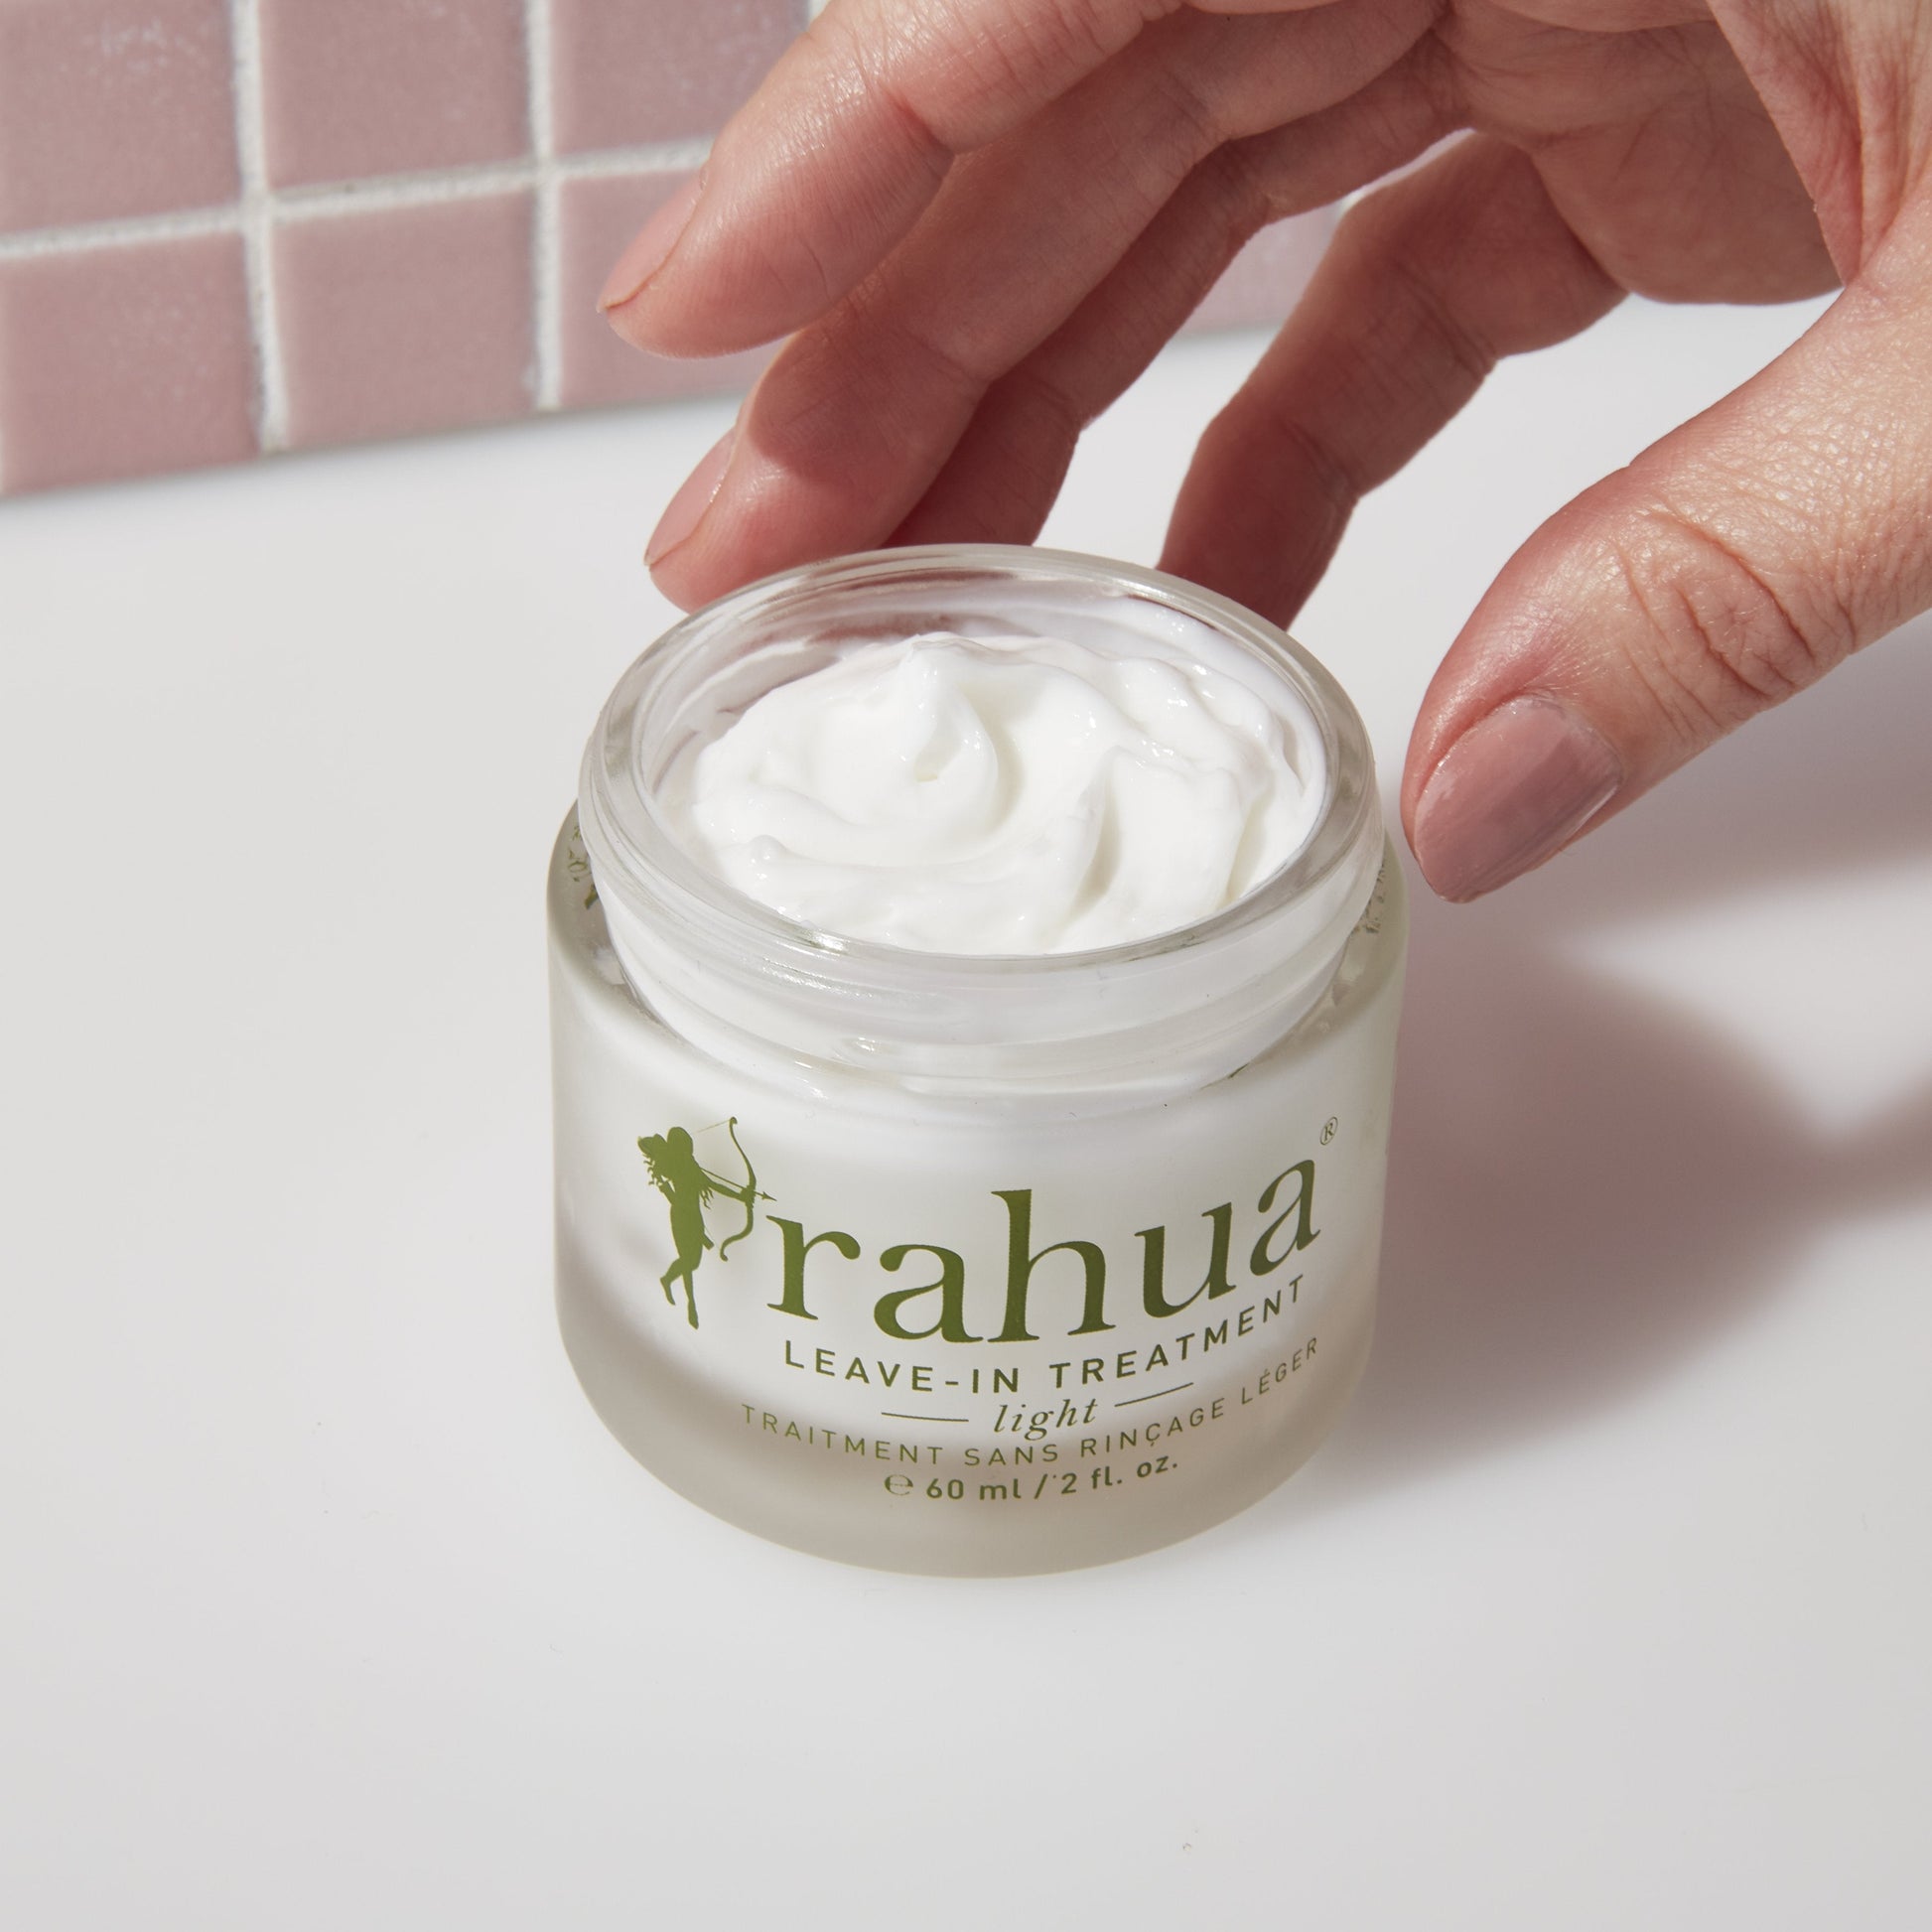 leave in treatment light with its creamy texture spread in the background